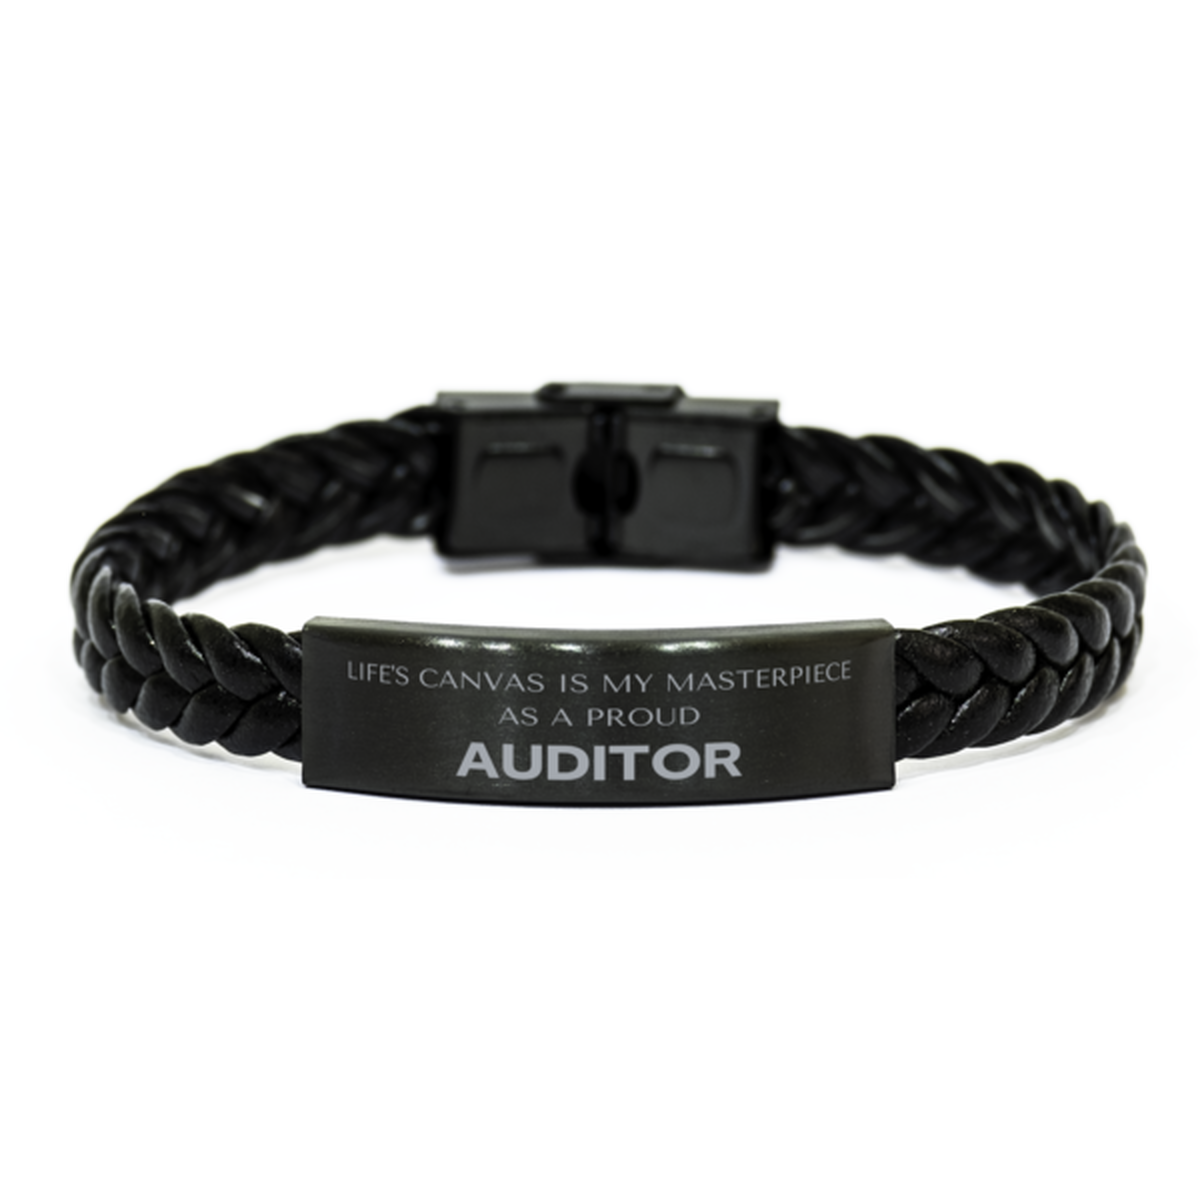 Proud Auditor Gifts, Life's canvas is my masterpiece, Epic Birthday Christmas Unique Braided Leather Bracelet For Auditor, Coworkers, Men, Women, Friends